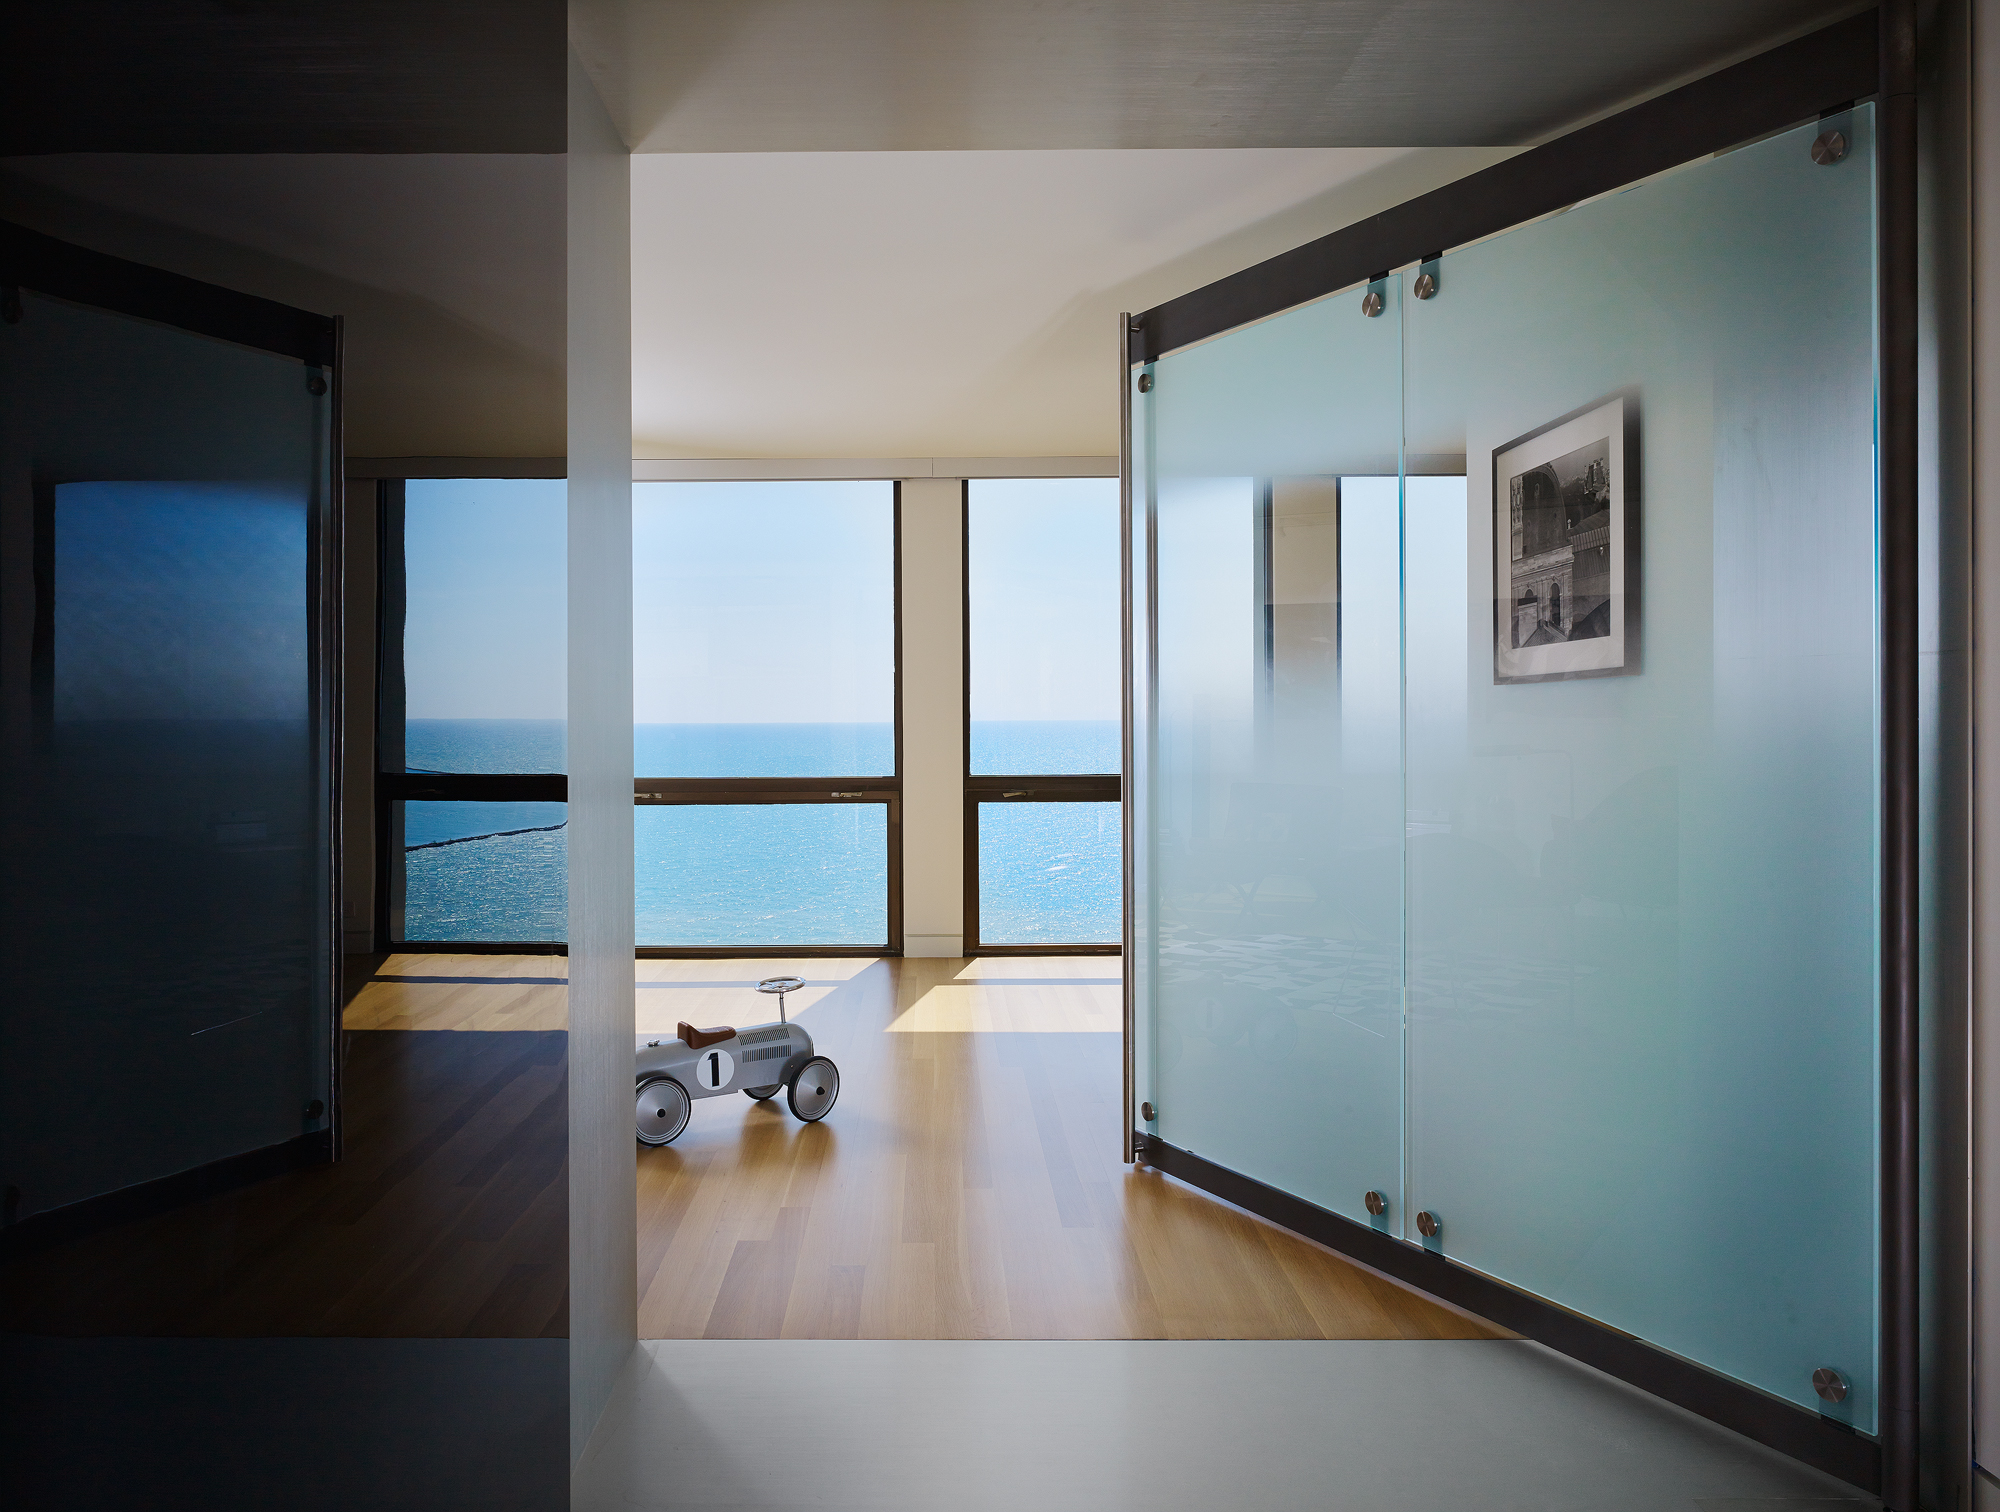  Lake Shore Drive Apartment  Eric Keune  Chicago, IL      Return to Projects  